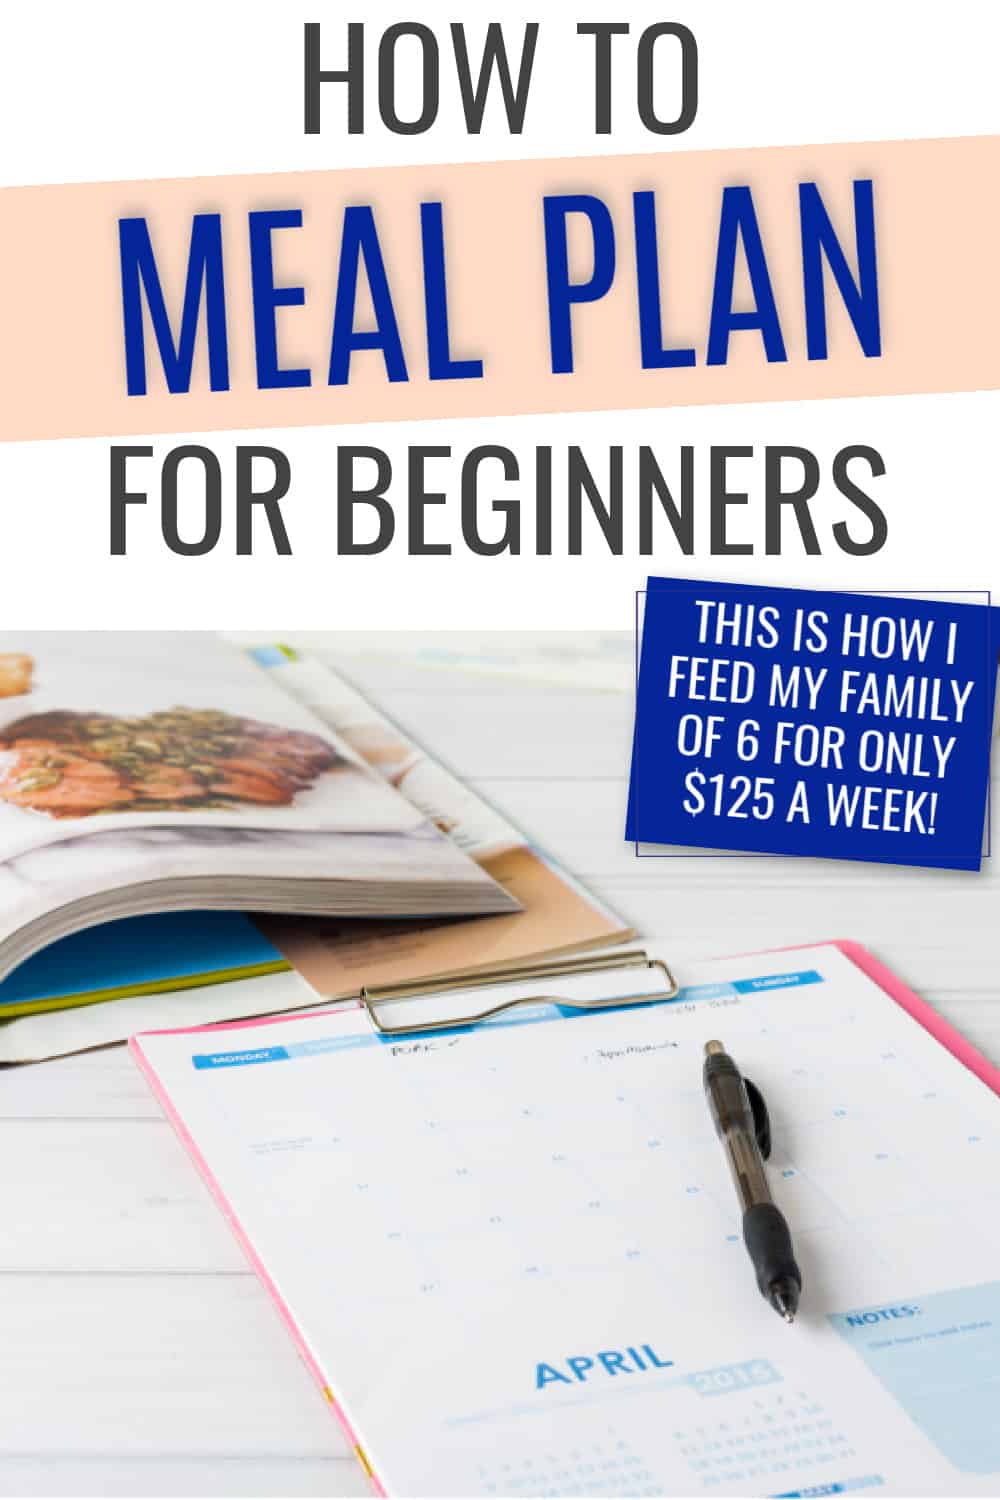 How to Meal Plan for Beginners